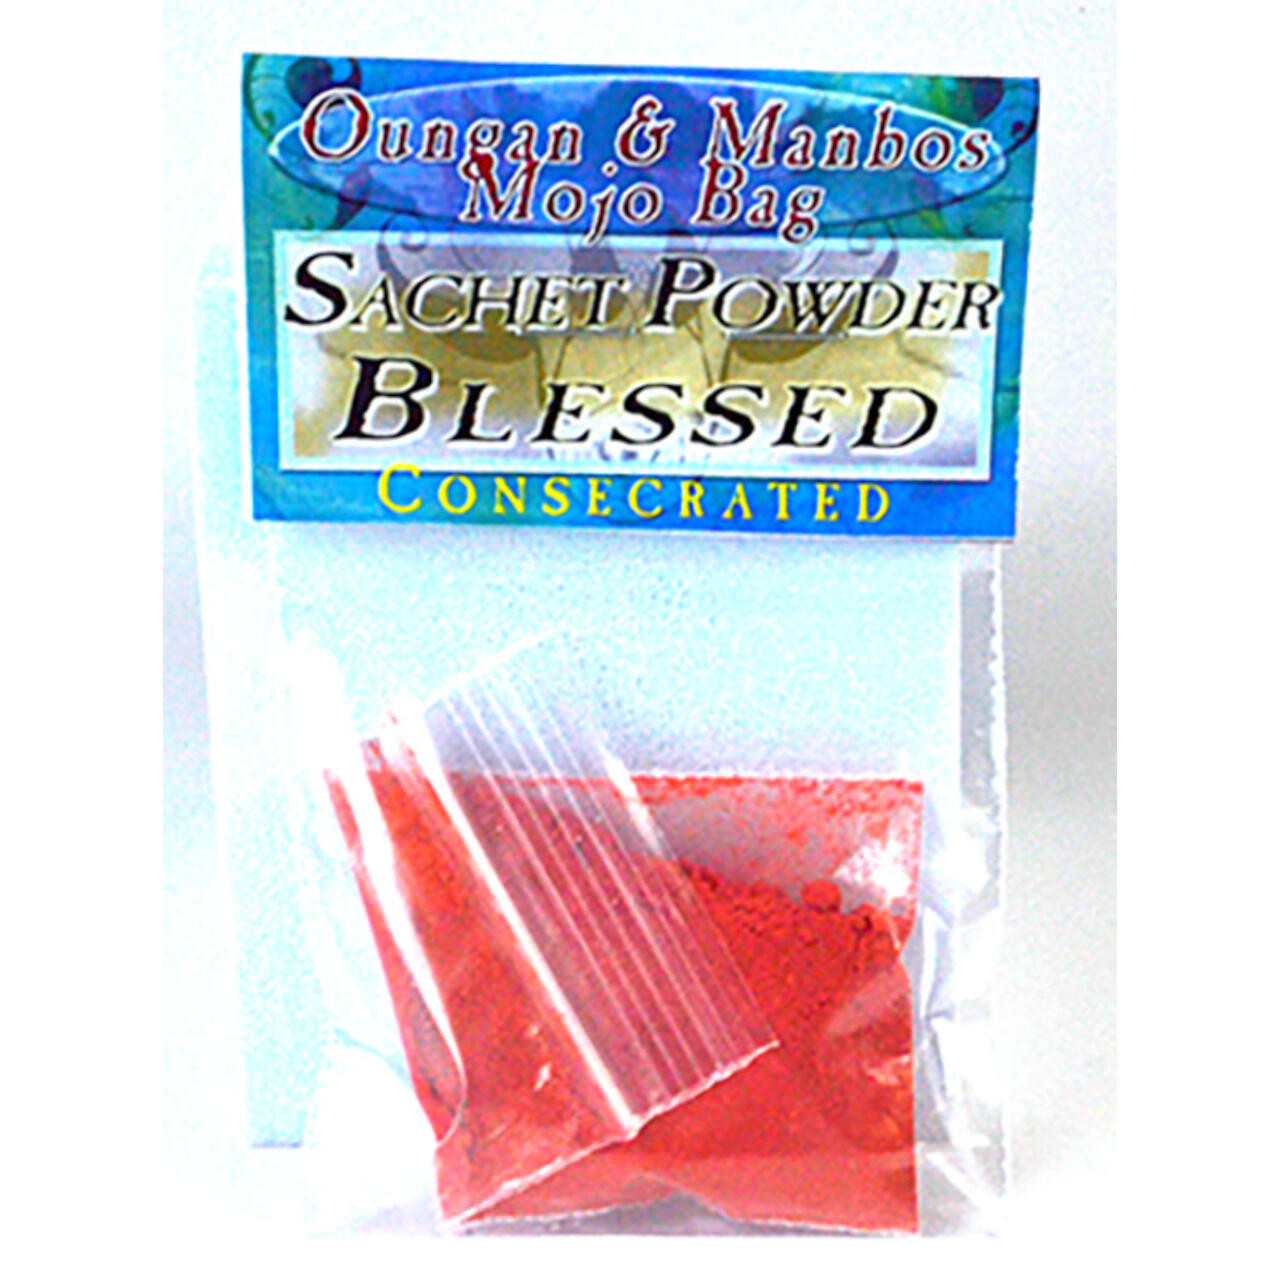 Blessed Sachet Powder Consecrated .5 oz